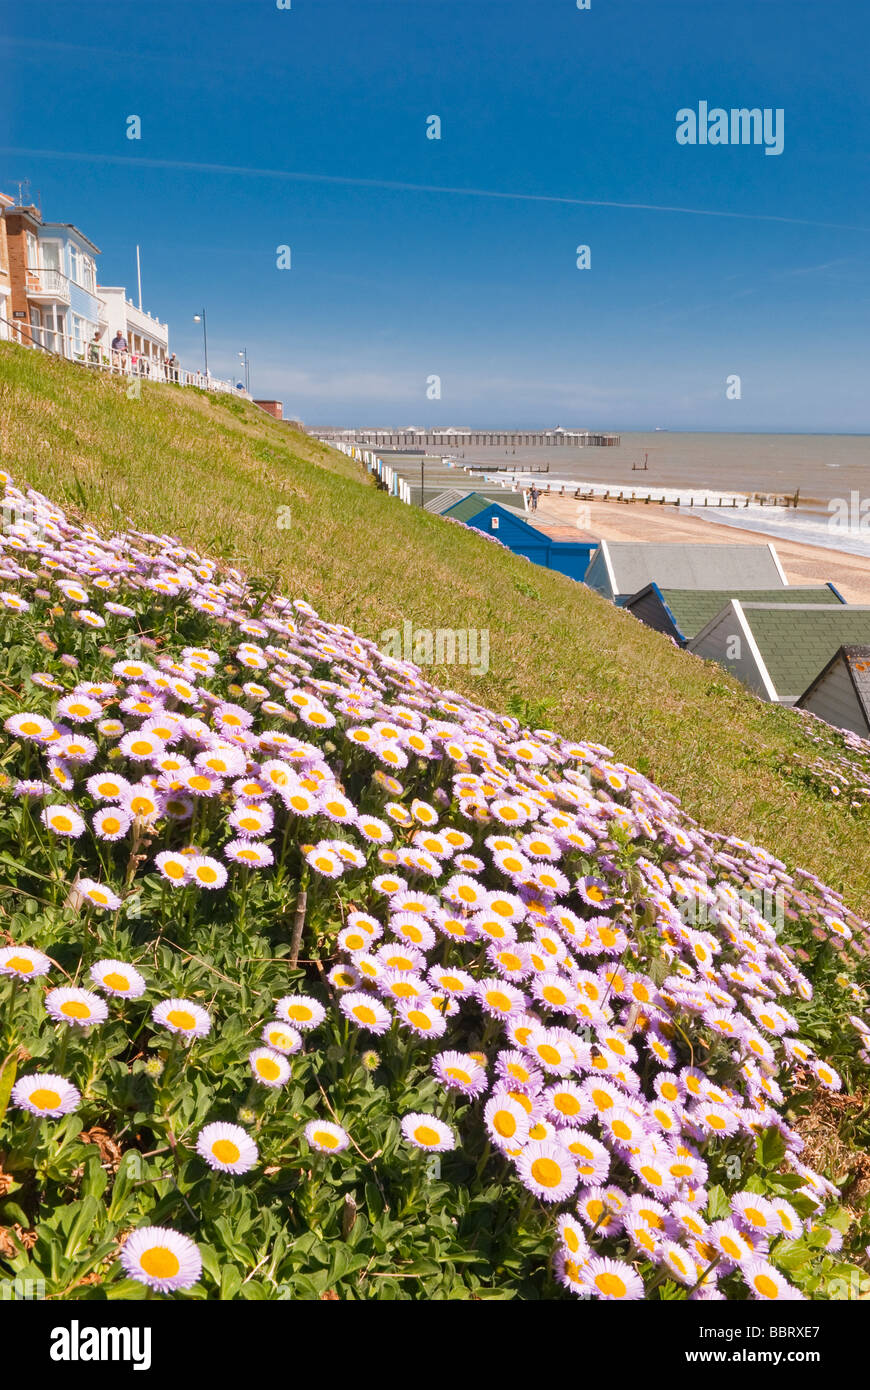 A view of Southwold seafront at the seaside with the pier in the background and flowers in the foreground in spring in the Uk Stock Photo